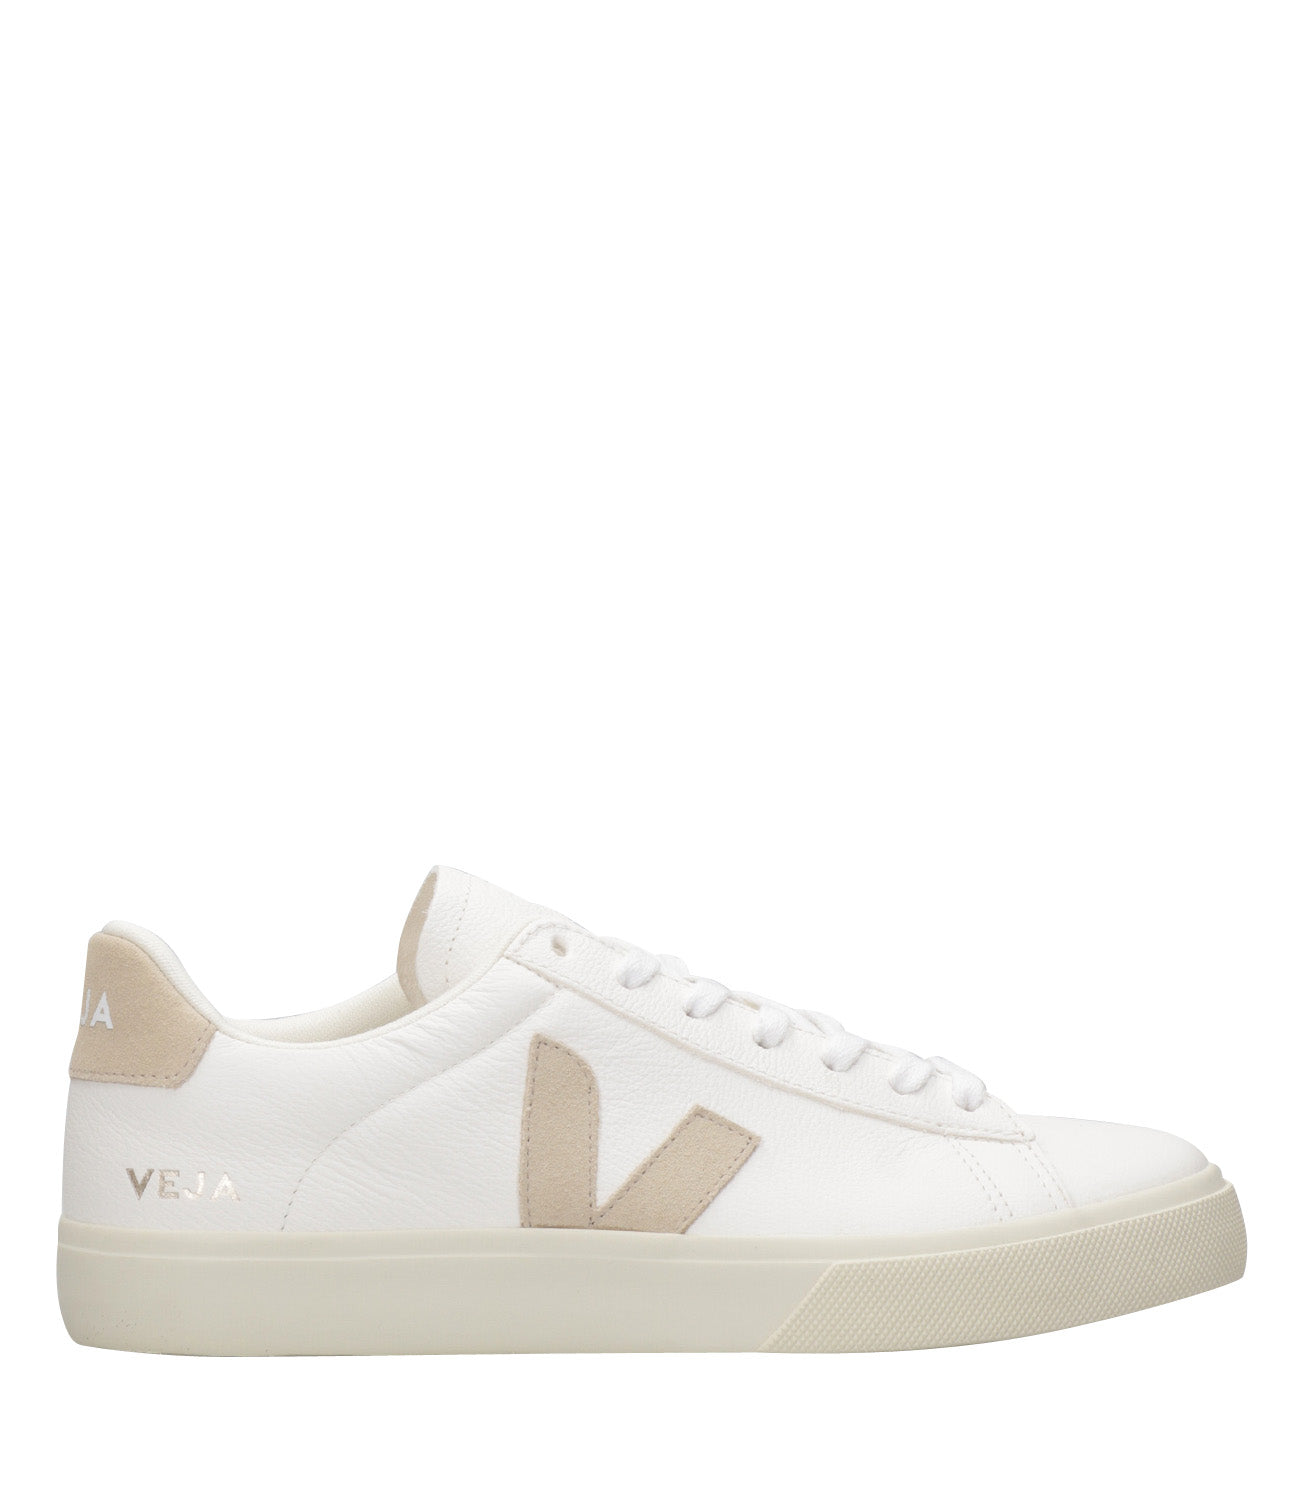 Veja | Field Sneakers Chromefree White and Almond